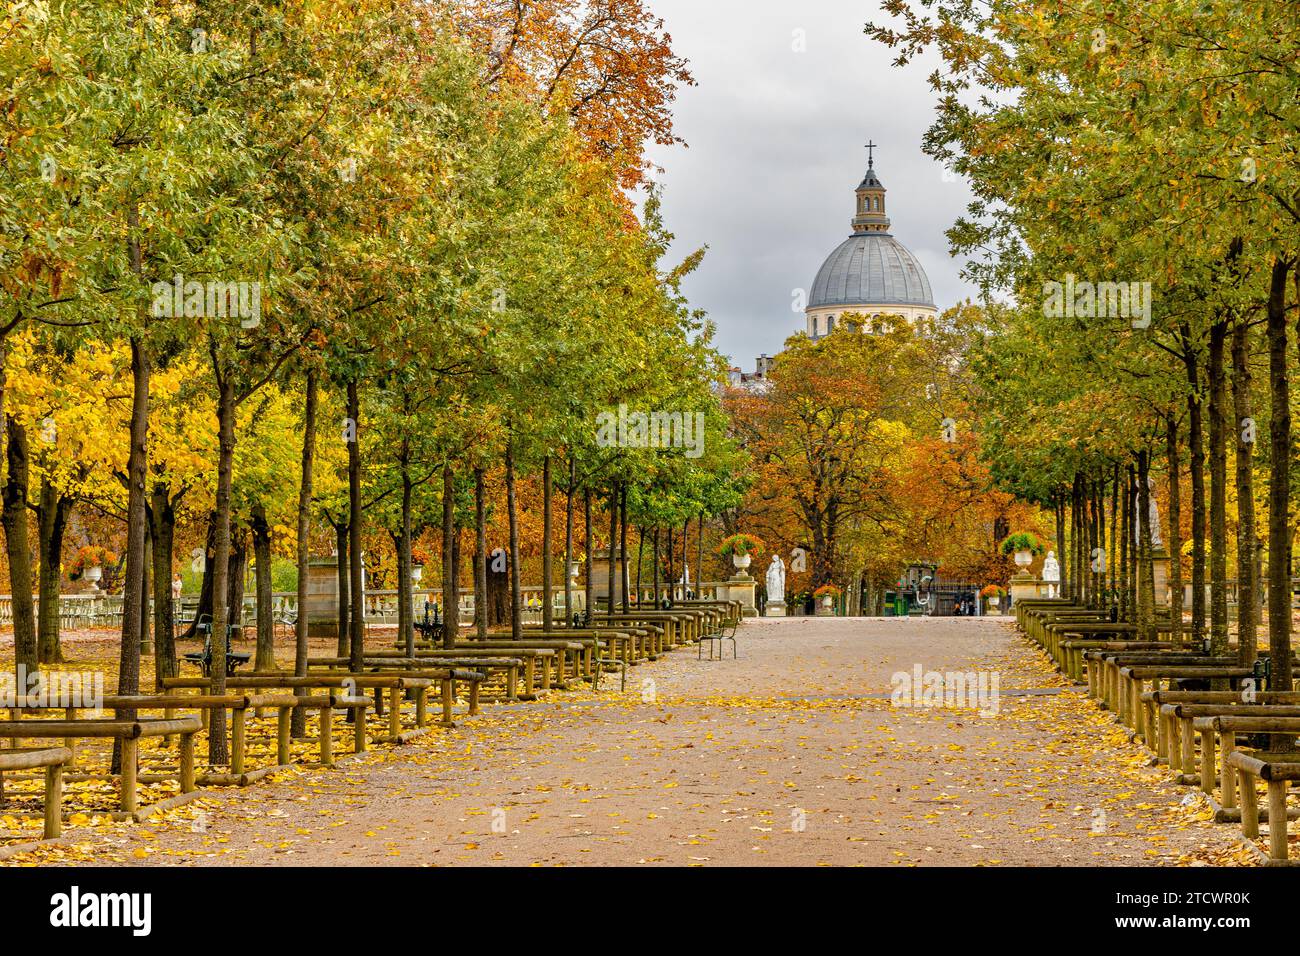 A tree lined avenue at autumn at The Jardin du Luxembourg with the dome of the Panthéon in the background, Paris,France Stock Photo